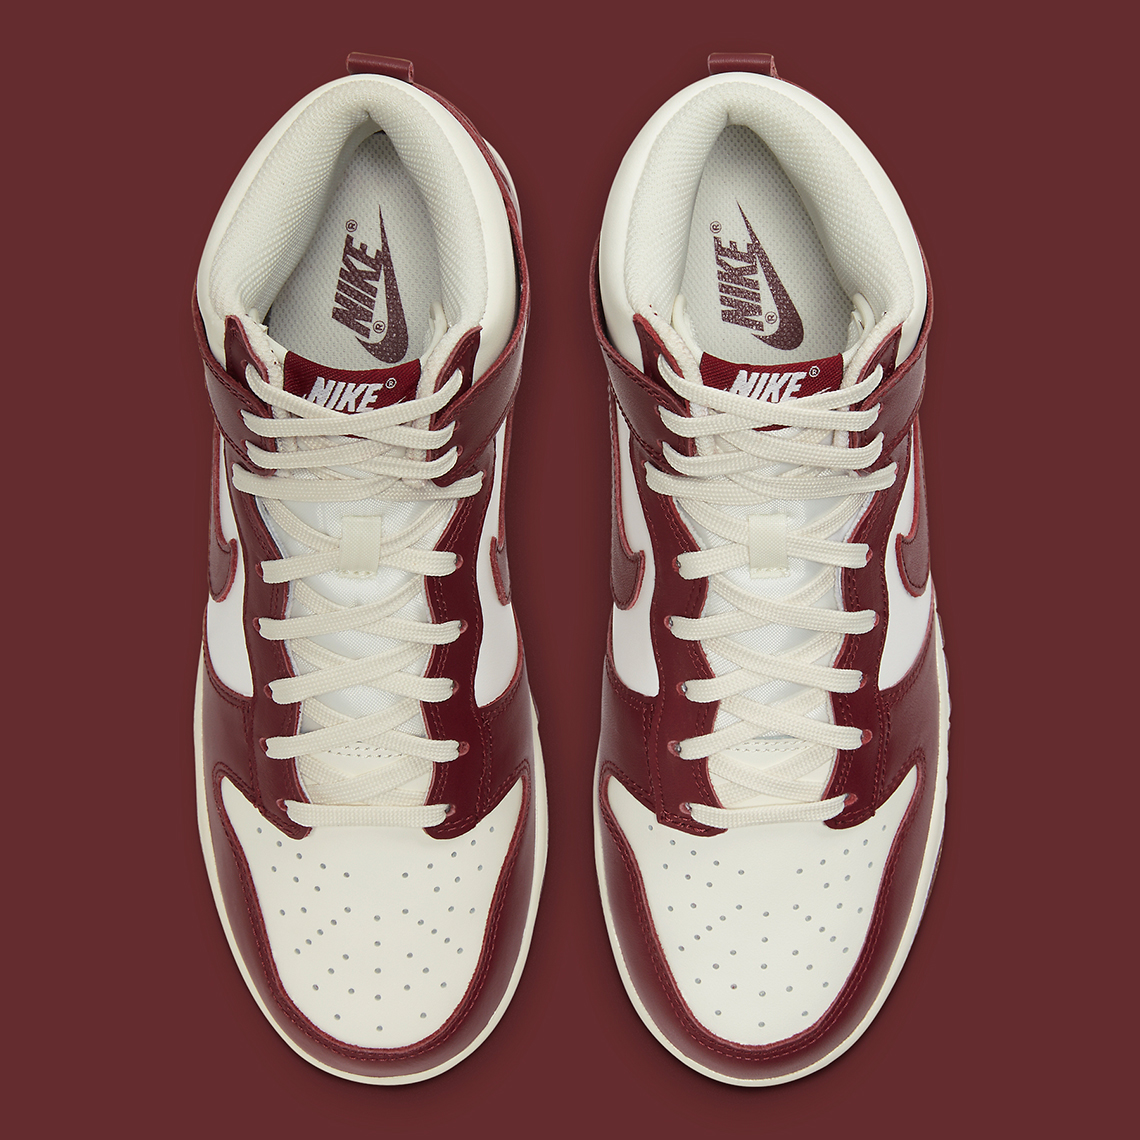 plain white nike shoes to paint colors Team Red Dd1869 101 3